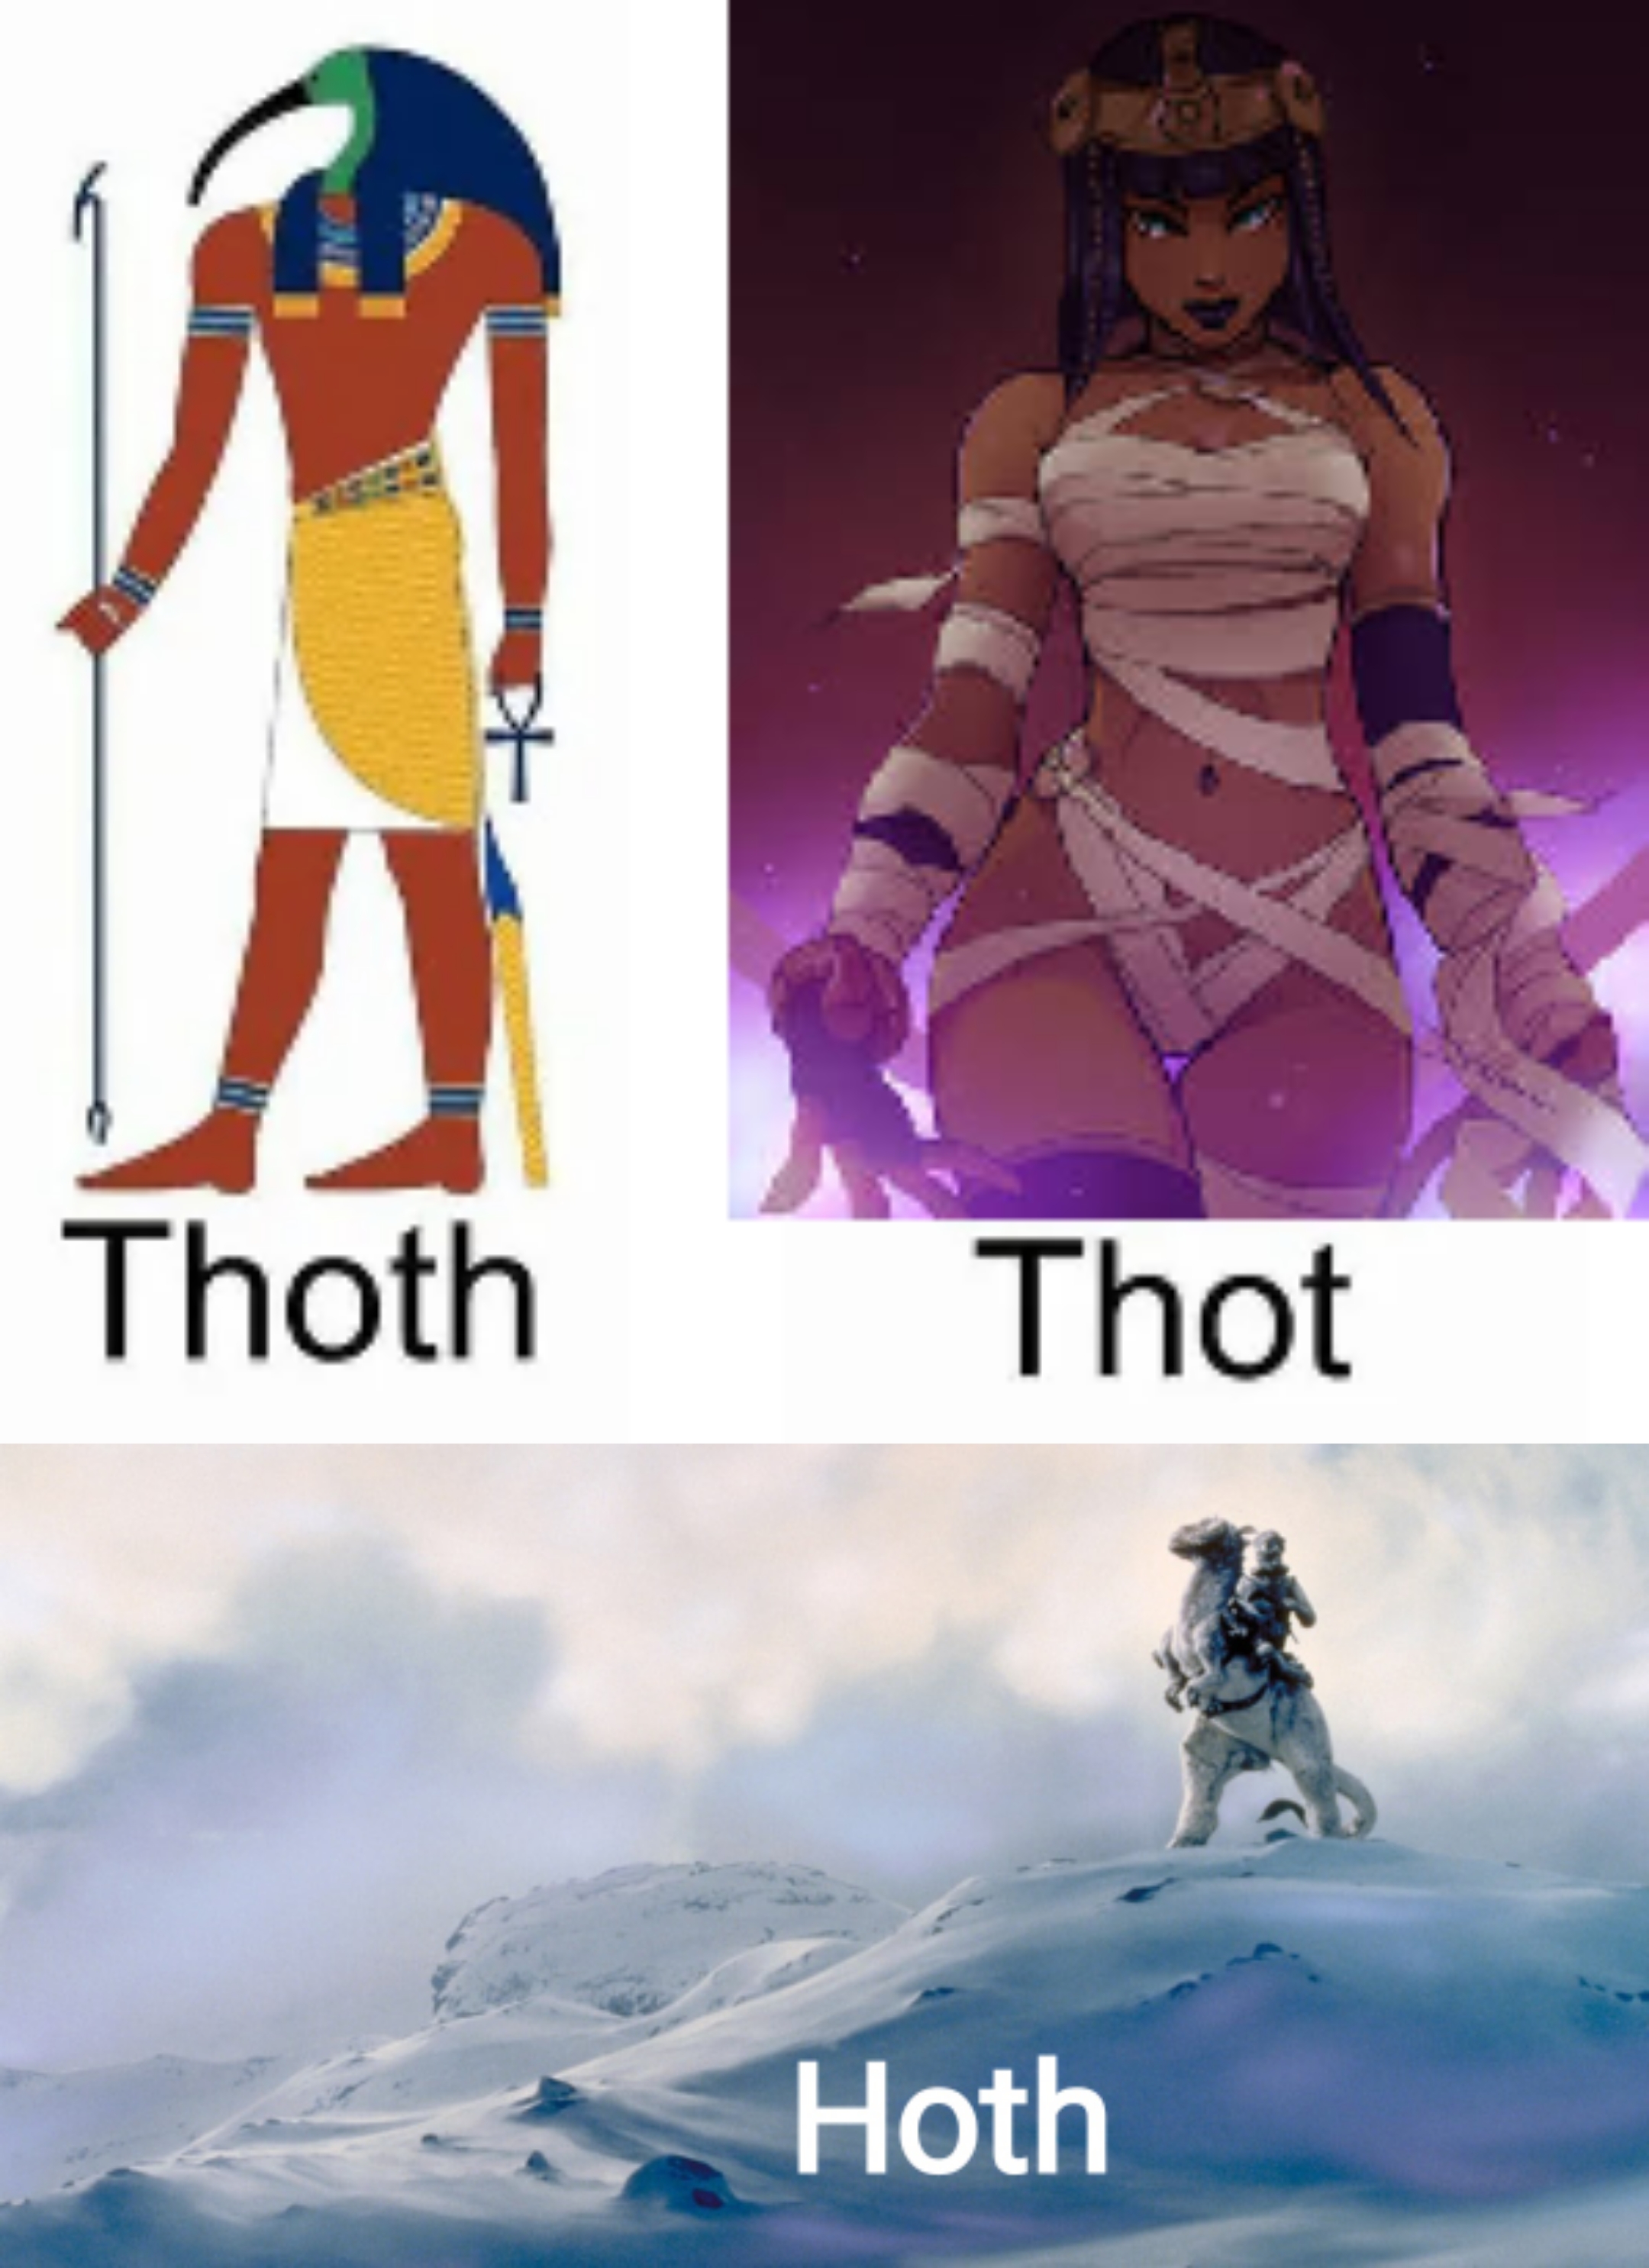 egyptian god of funerals - Thoth Thot Hoth